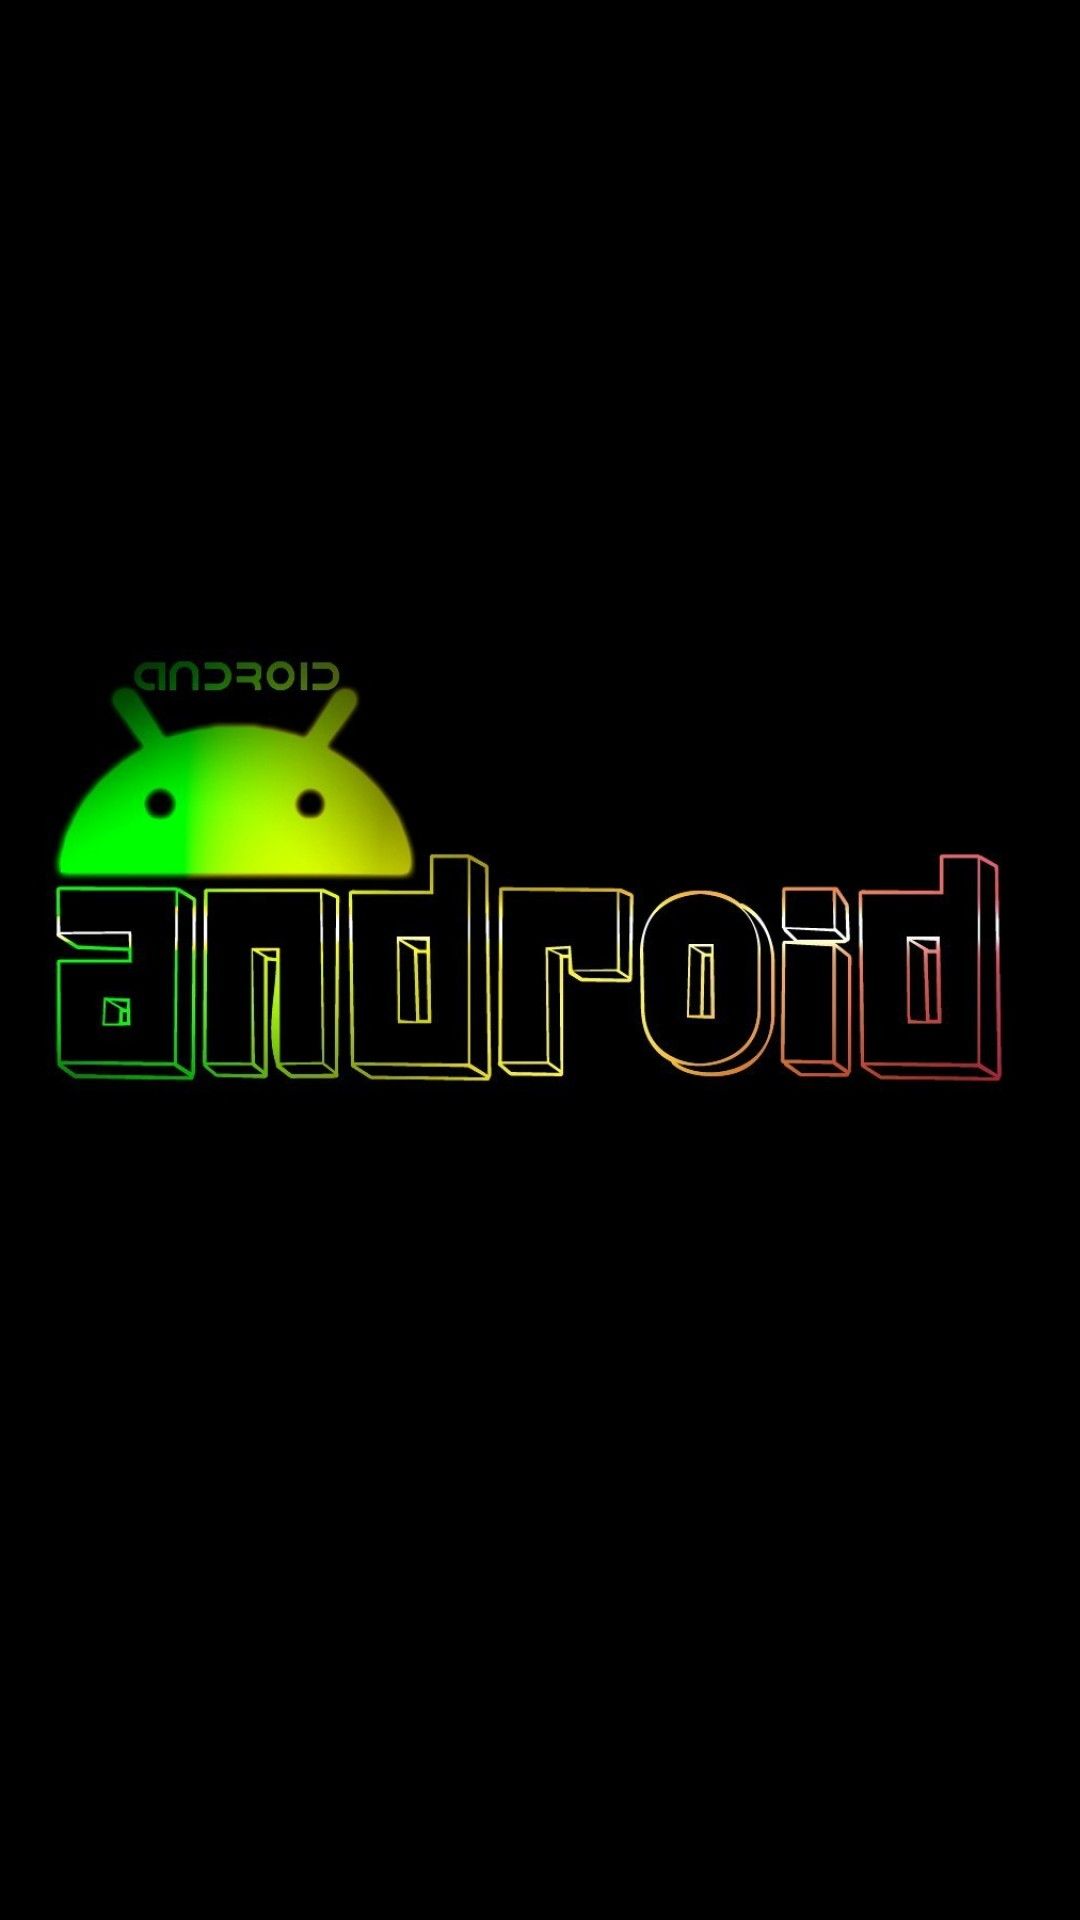 Free download HD android logo wallpaper for mobile 1080x1920 [1080x1920] for your Desktop, Mobile & Tablet. Explore HD Wallpaper for Android Phones. Android HD Wallpaper for Mobile, 3D Moving